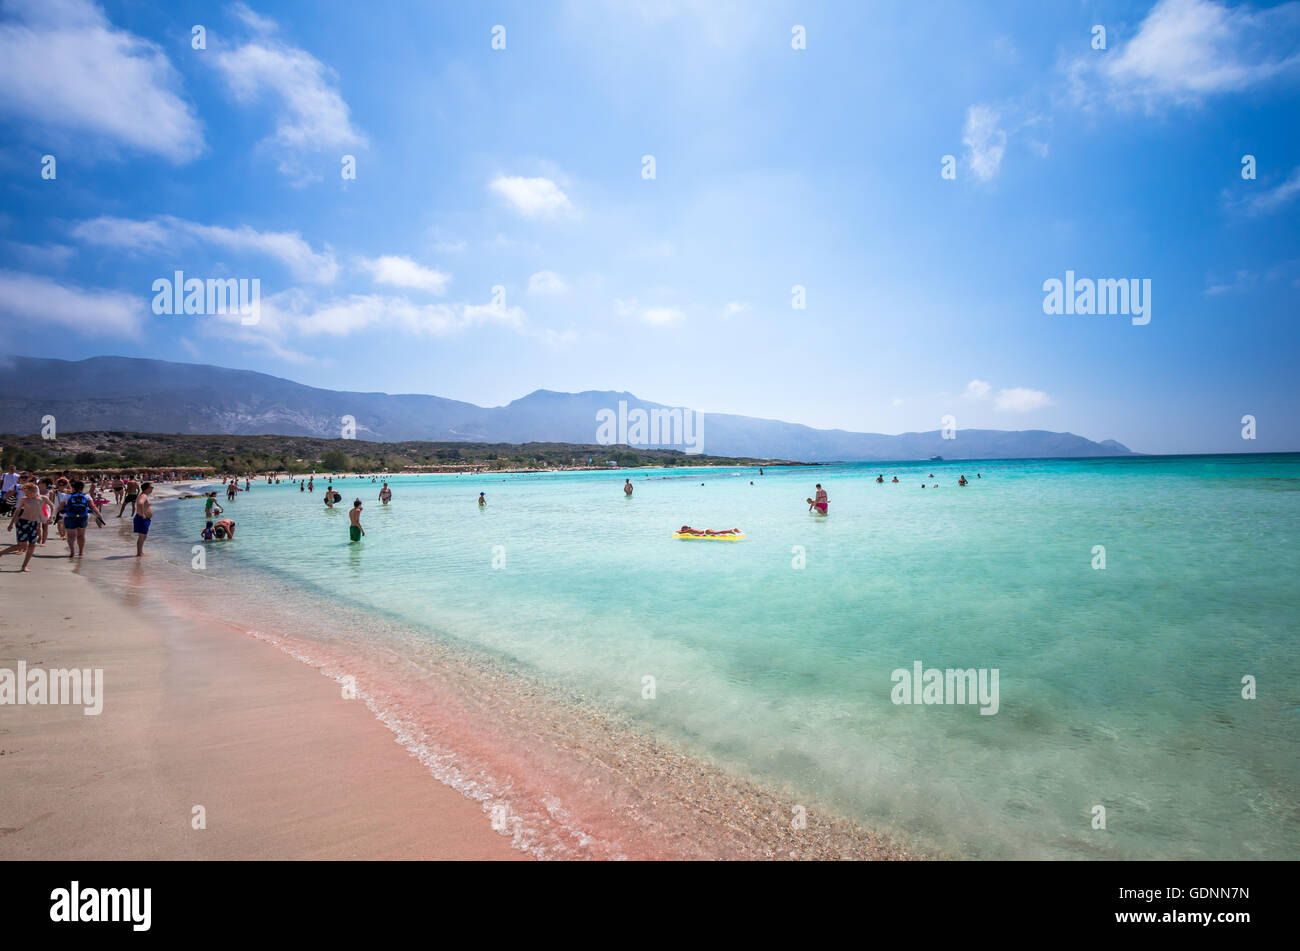 Elafonissi Lagoon, Crete Island, Greece. Elafonisi beach is one of the best beaches of Europe. There are pink and black sand. Stock Photo